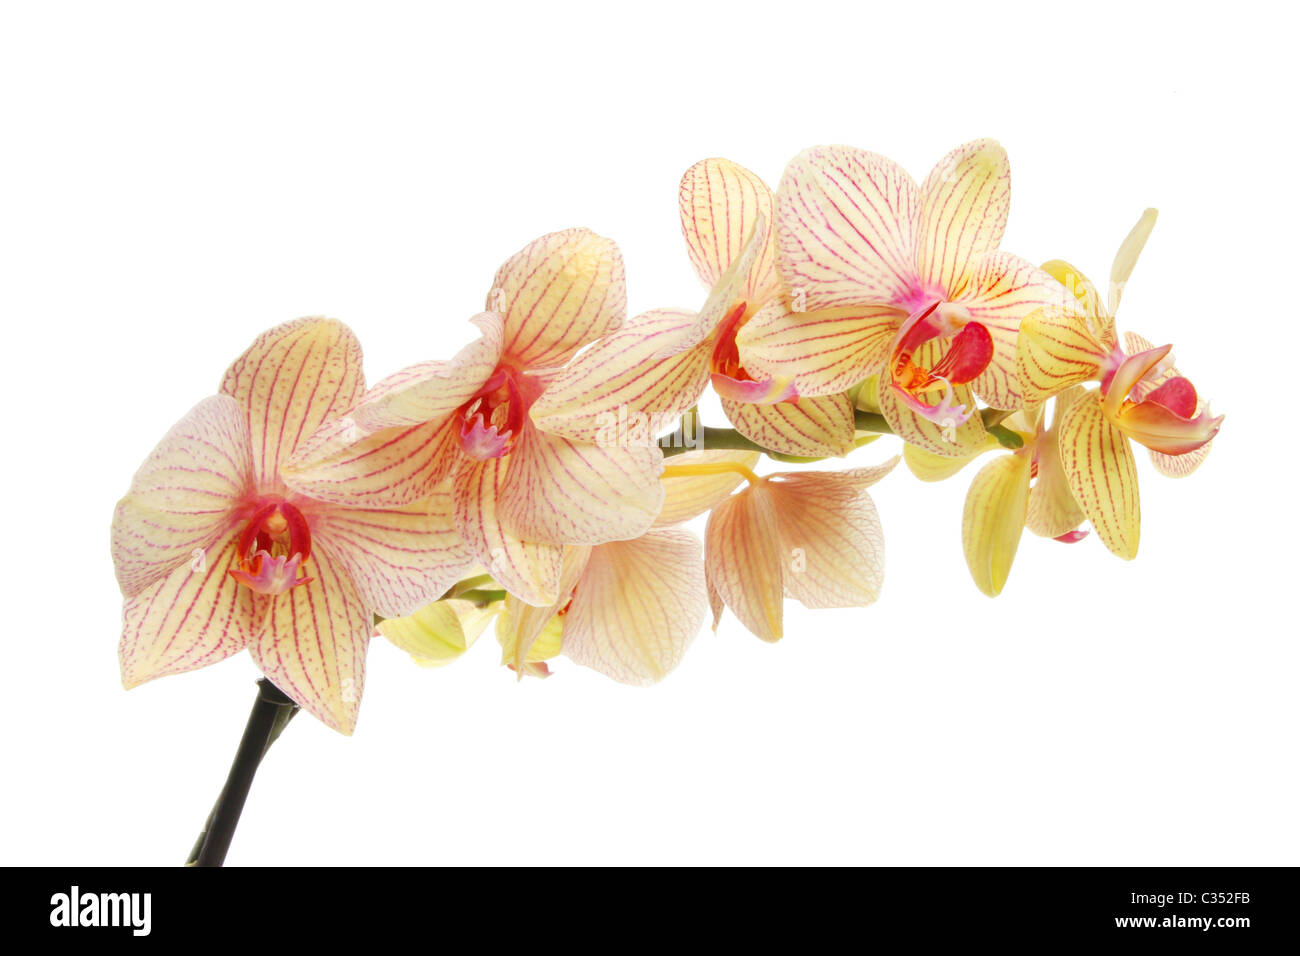 Spray of Phalaenopsis orchid flowers against white Stock Photo